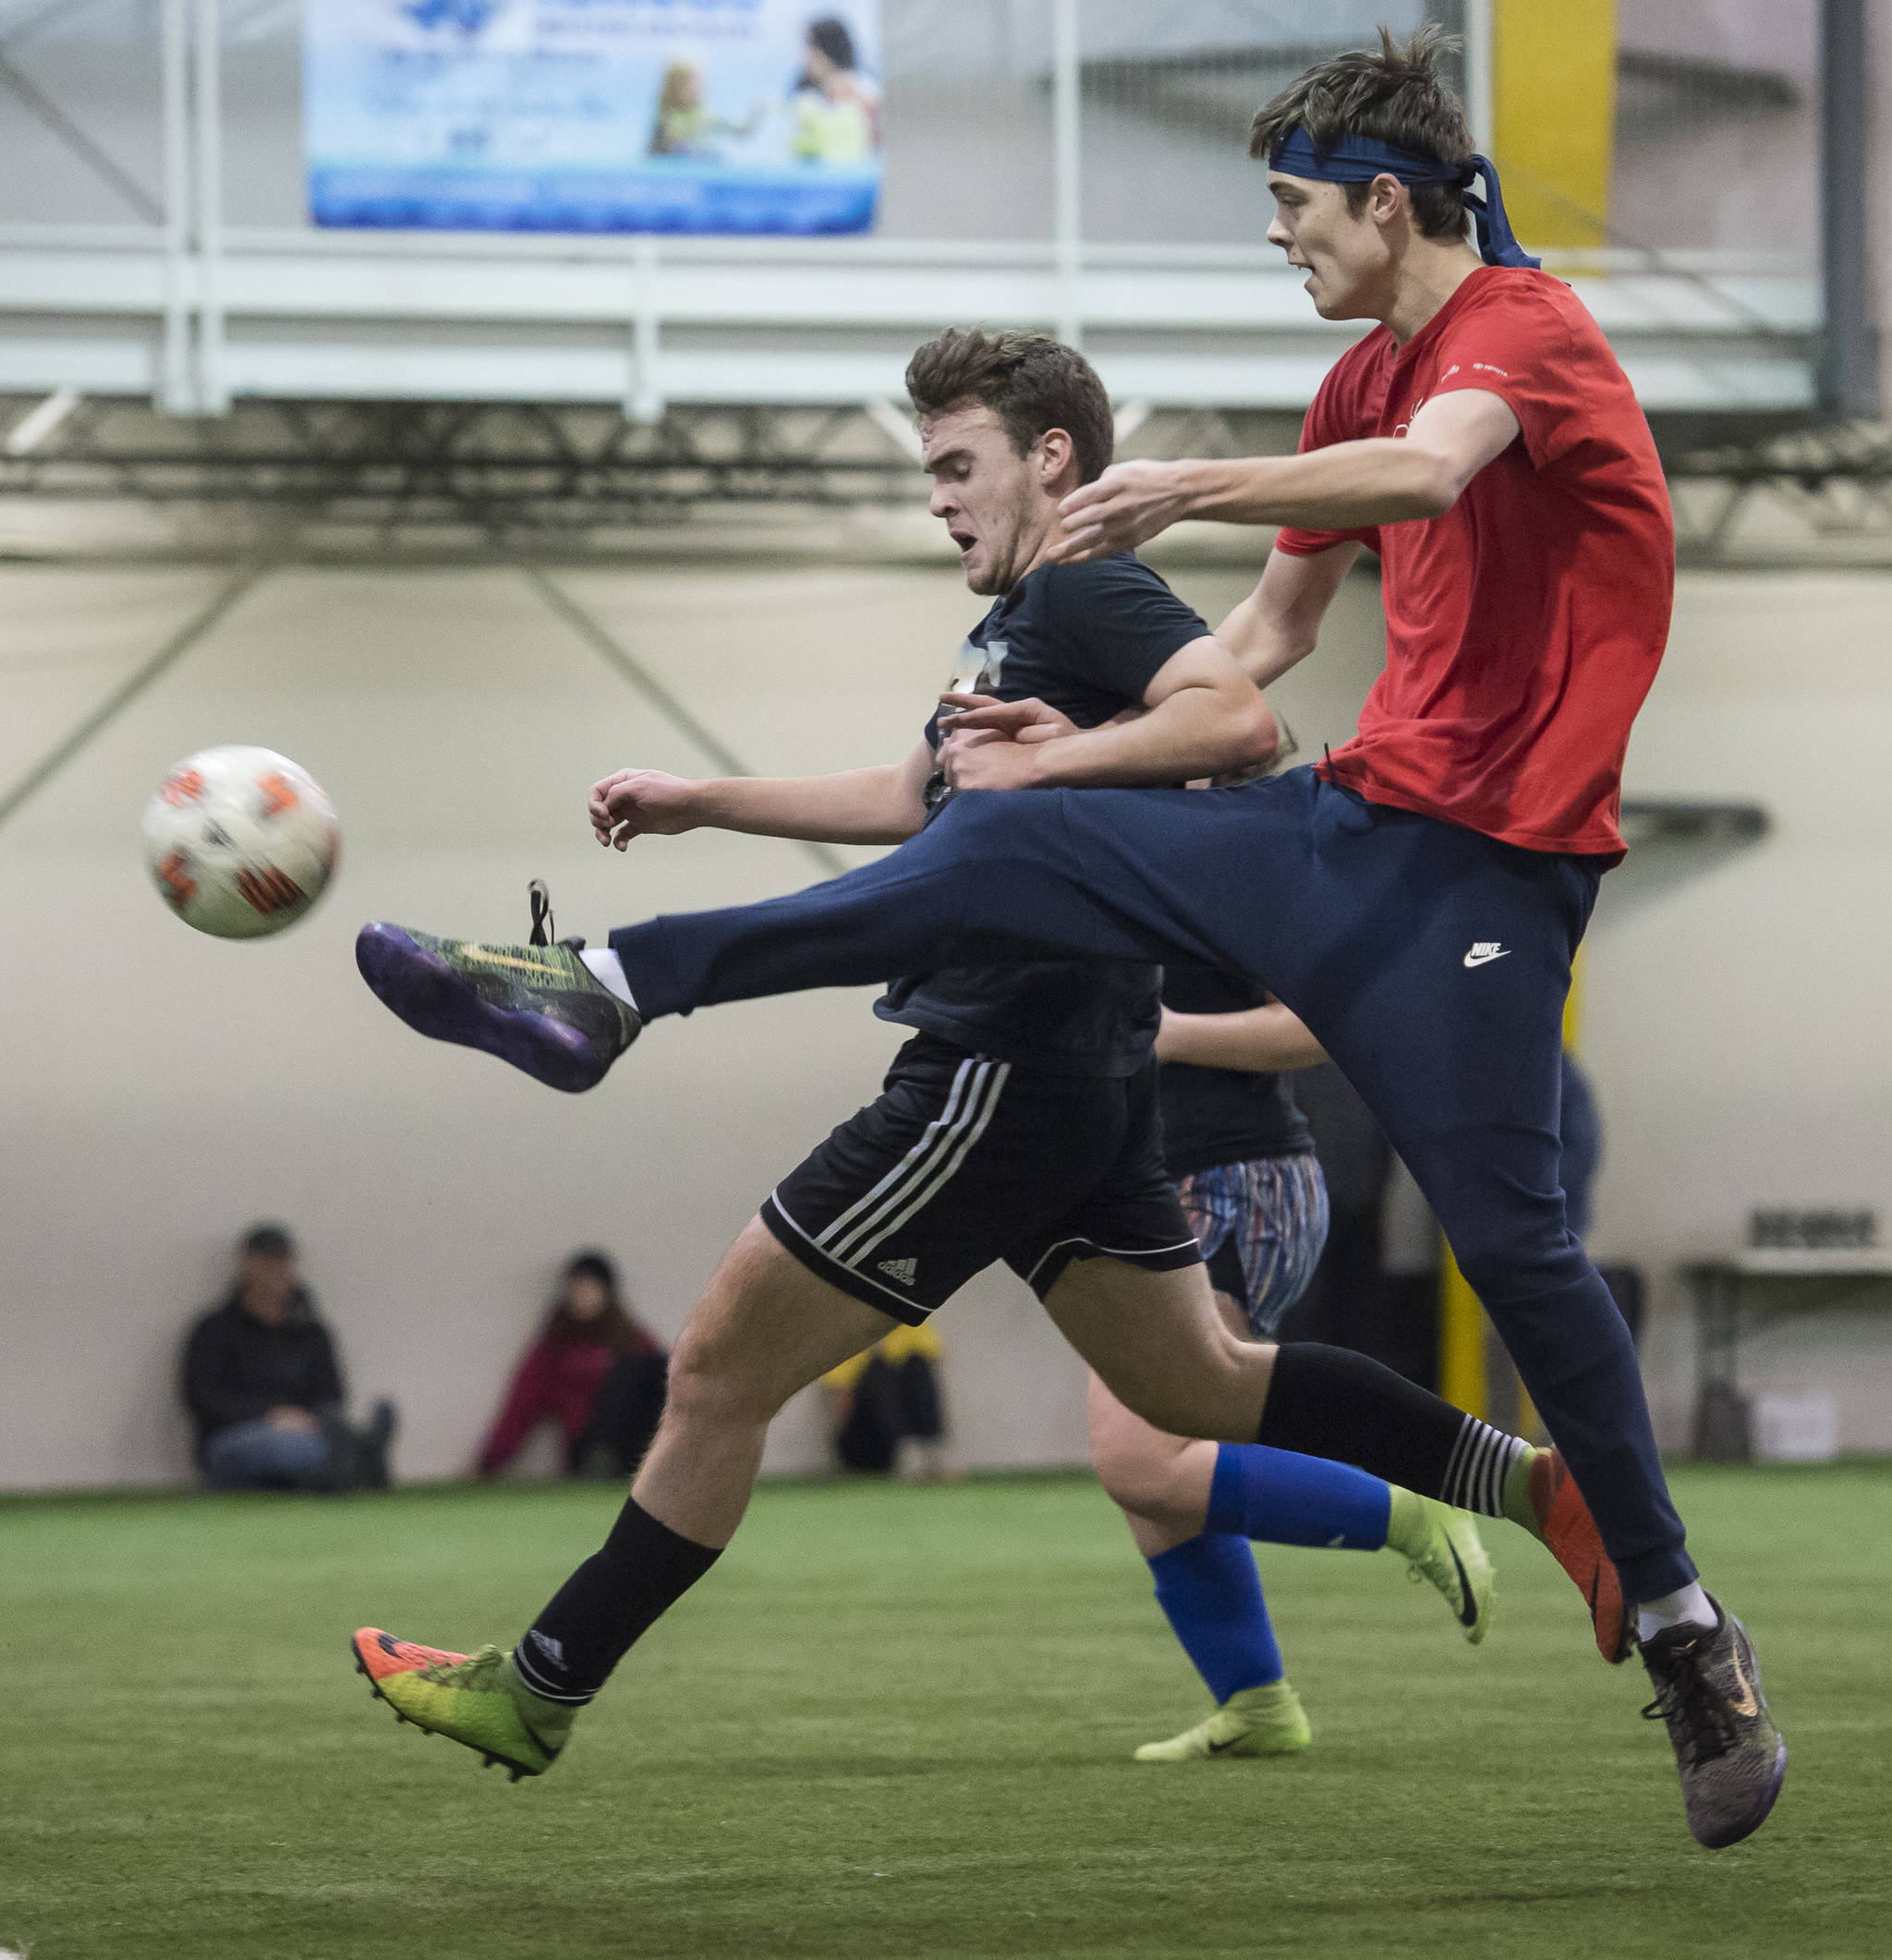 Grinch Gang’s Kaleb Tompkins, right, fires a shot to the goal against Black Ice’s Michael White in the finals of the senior division at the annual Holiday Cup Soccer Tournament at the Wells Fargo Dimond Park Field House on Monday, Dec. 31, 2018. The Grinch Gang won 8-2. (Michael Penn | Juneau Empire)